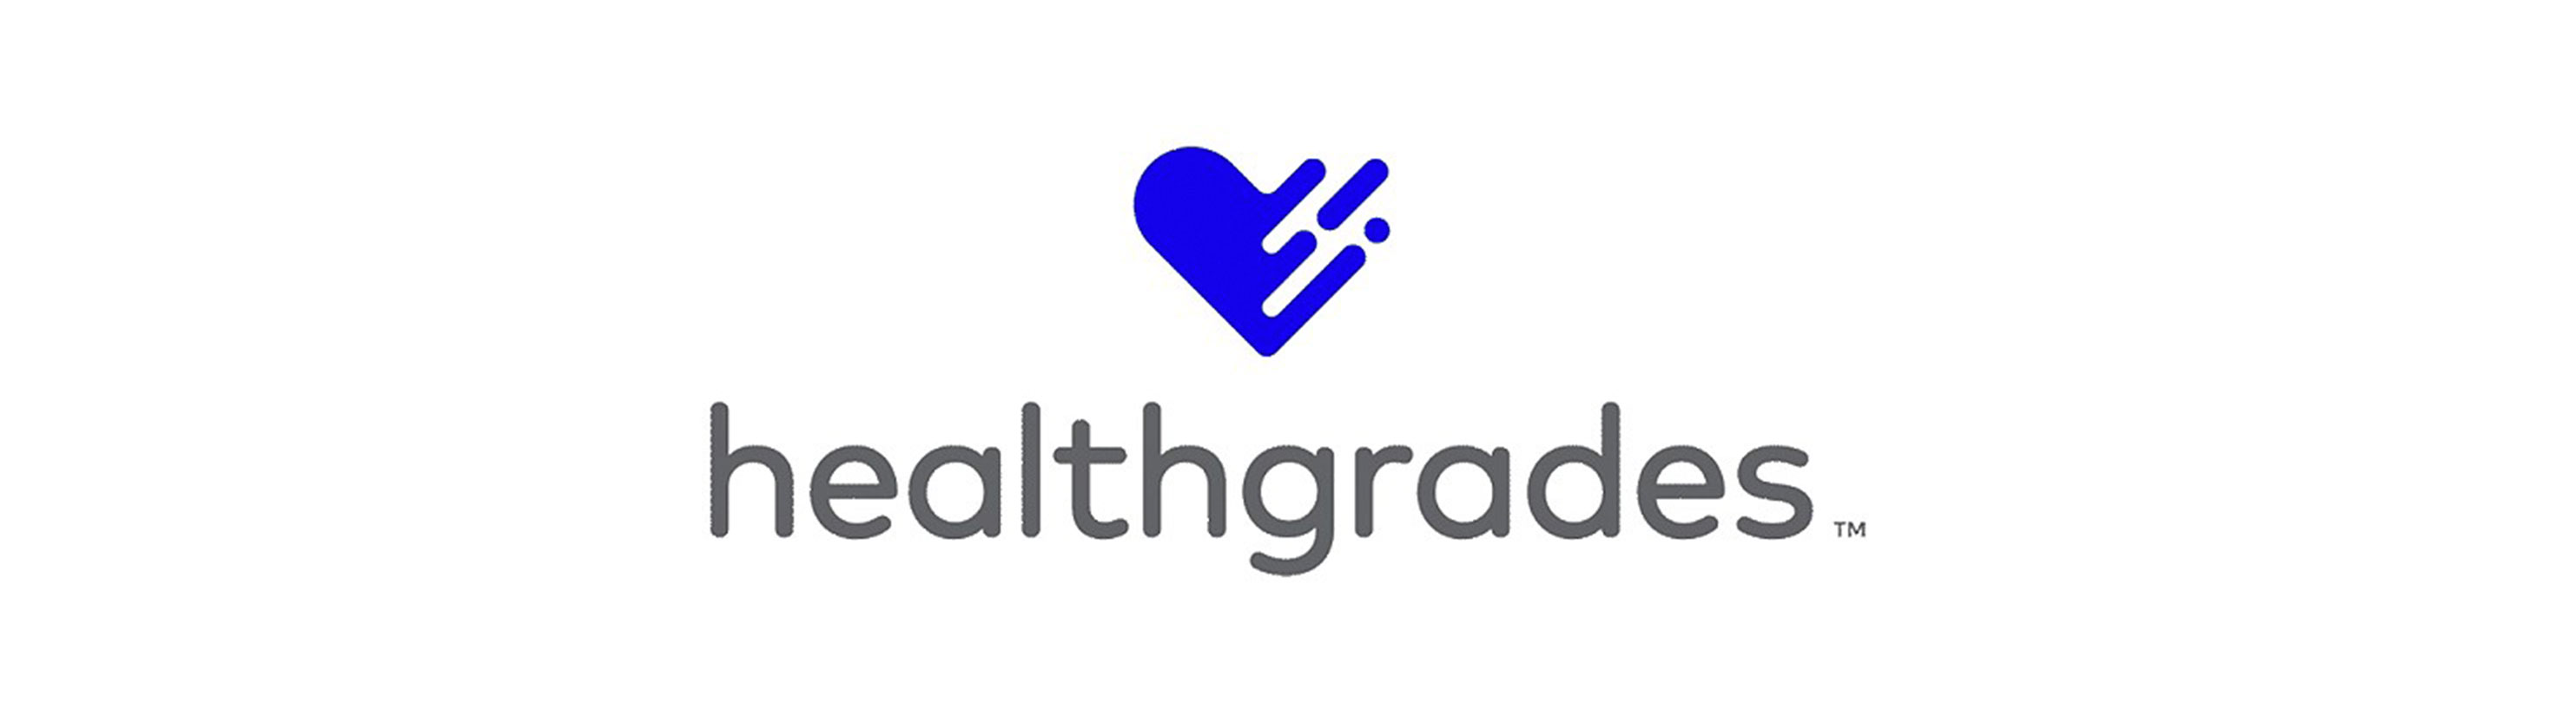 Hartford HealthCare Earns Excellence Awards and 5 Star Ratings From Healthgrades for High Quality Care